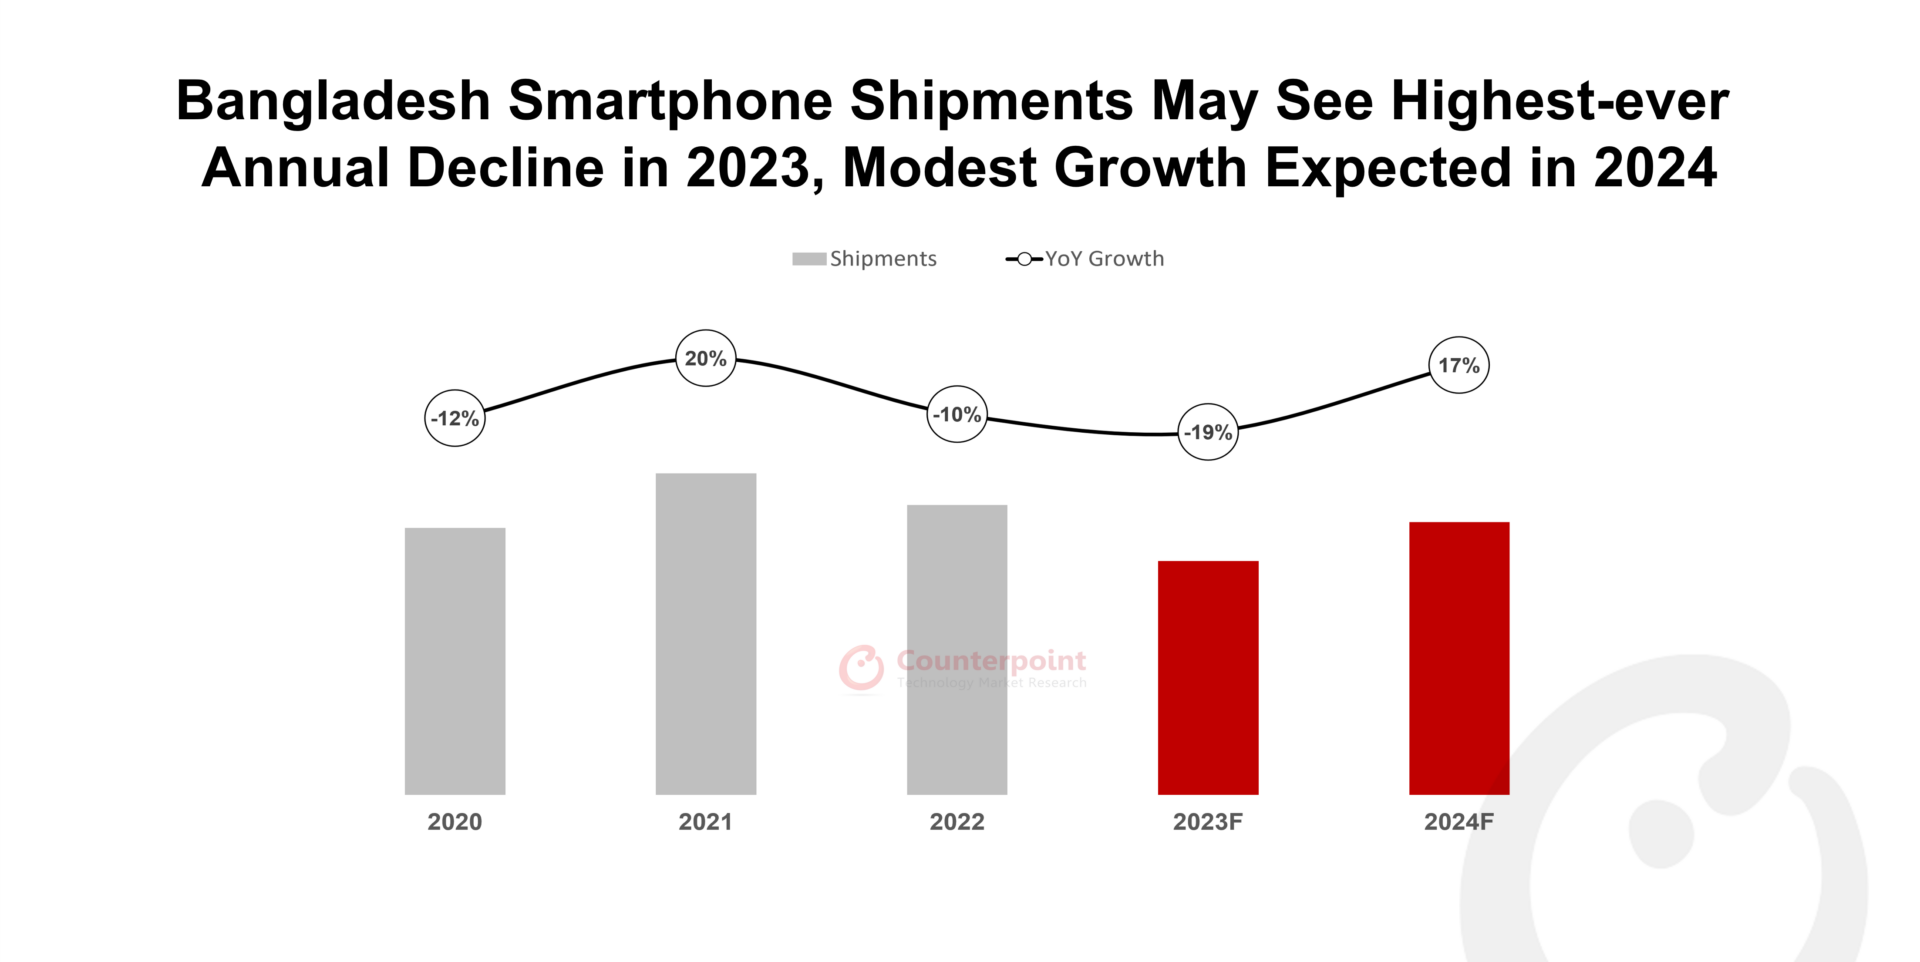 Bangladesh Smartphone Shipments May See Highest-ever Annual Decline in 2023, Modest Growth Expected in 2024